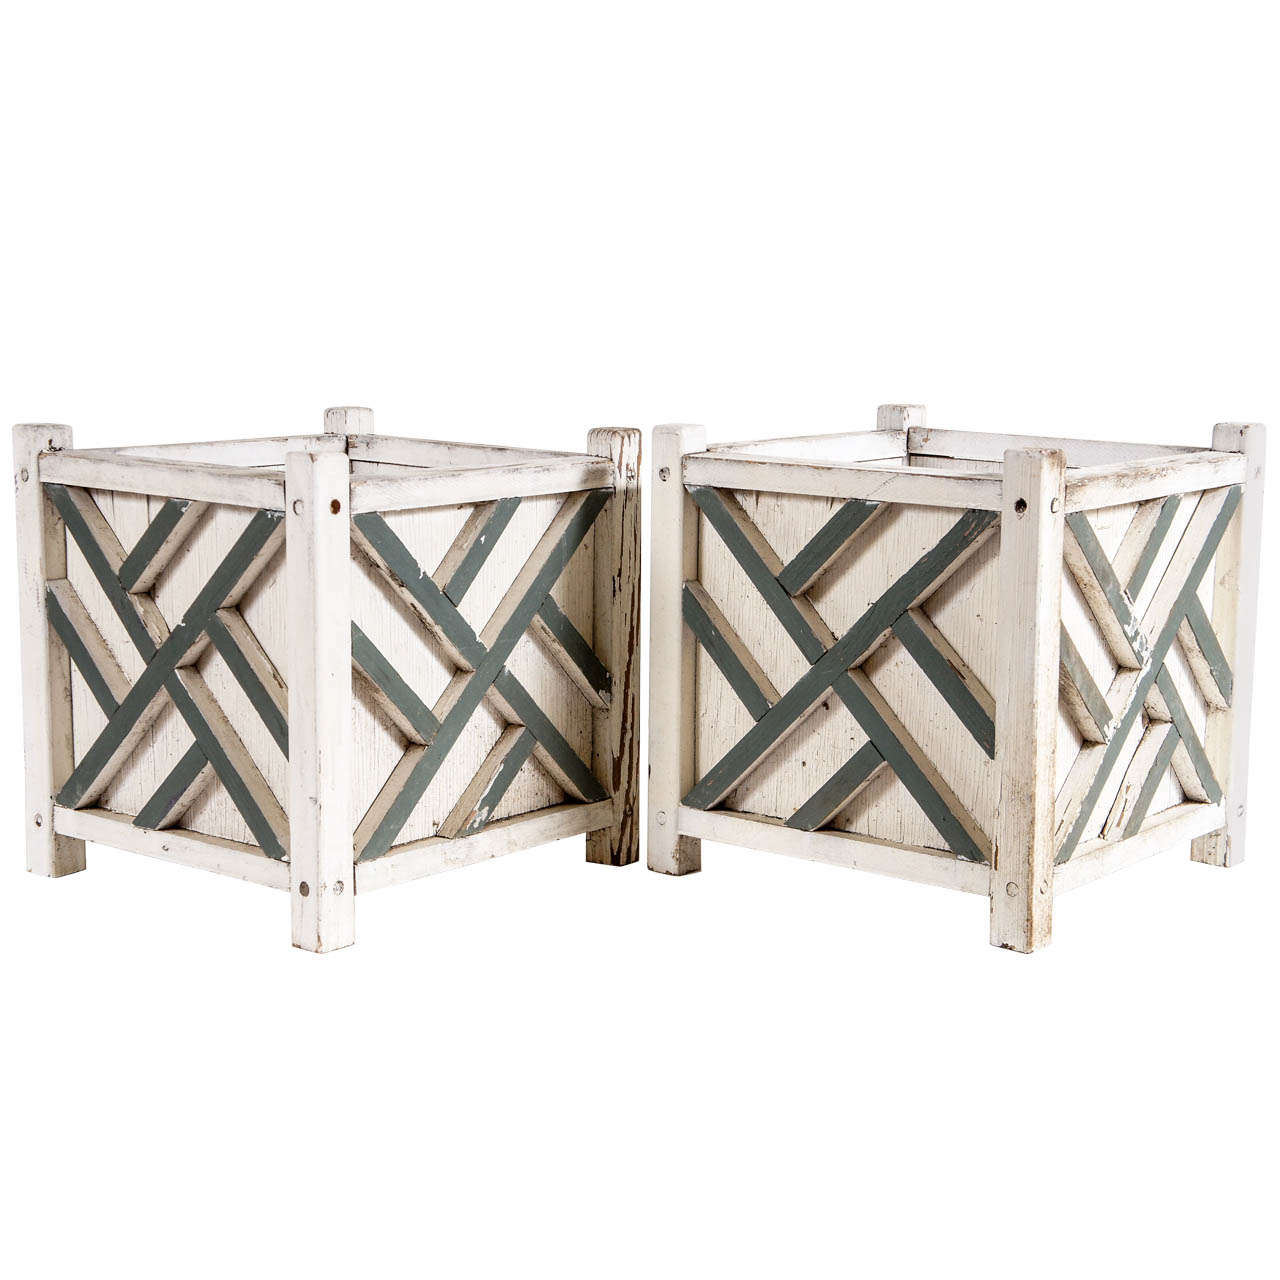 A Pair of Boxed Planters with Lattice Motif For Sale